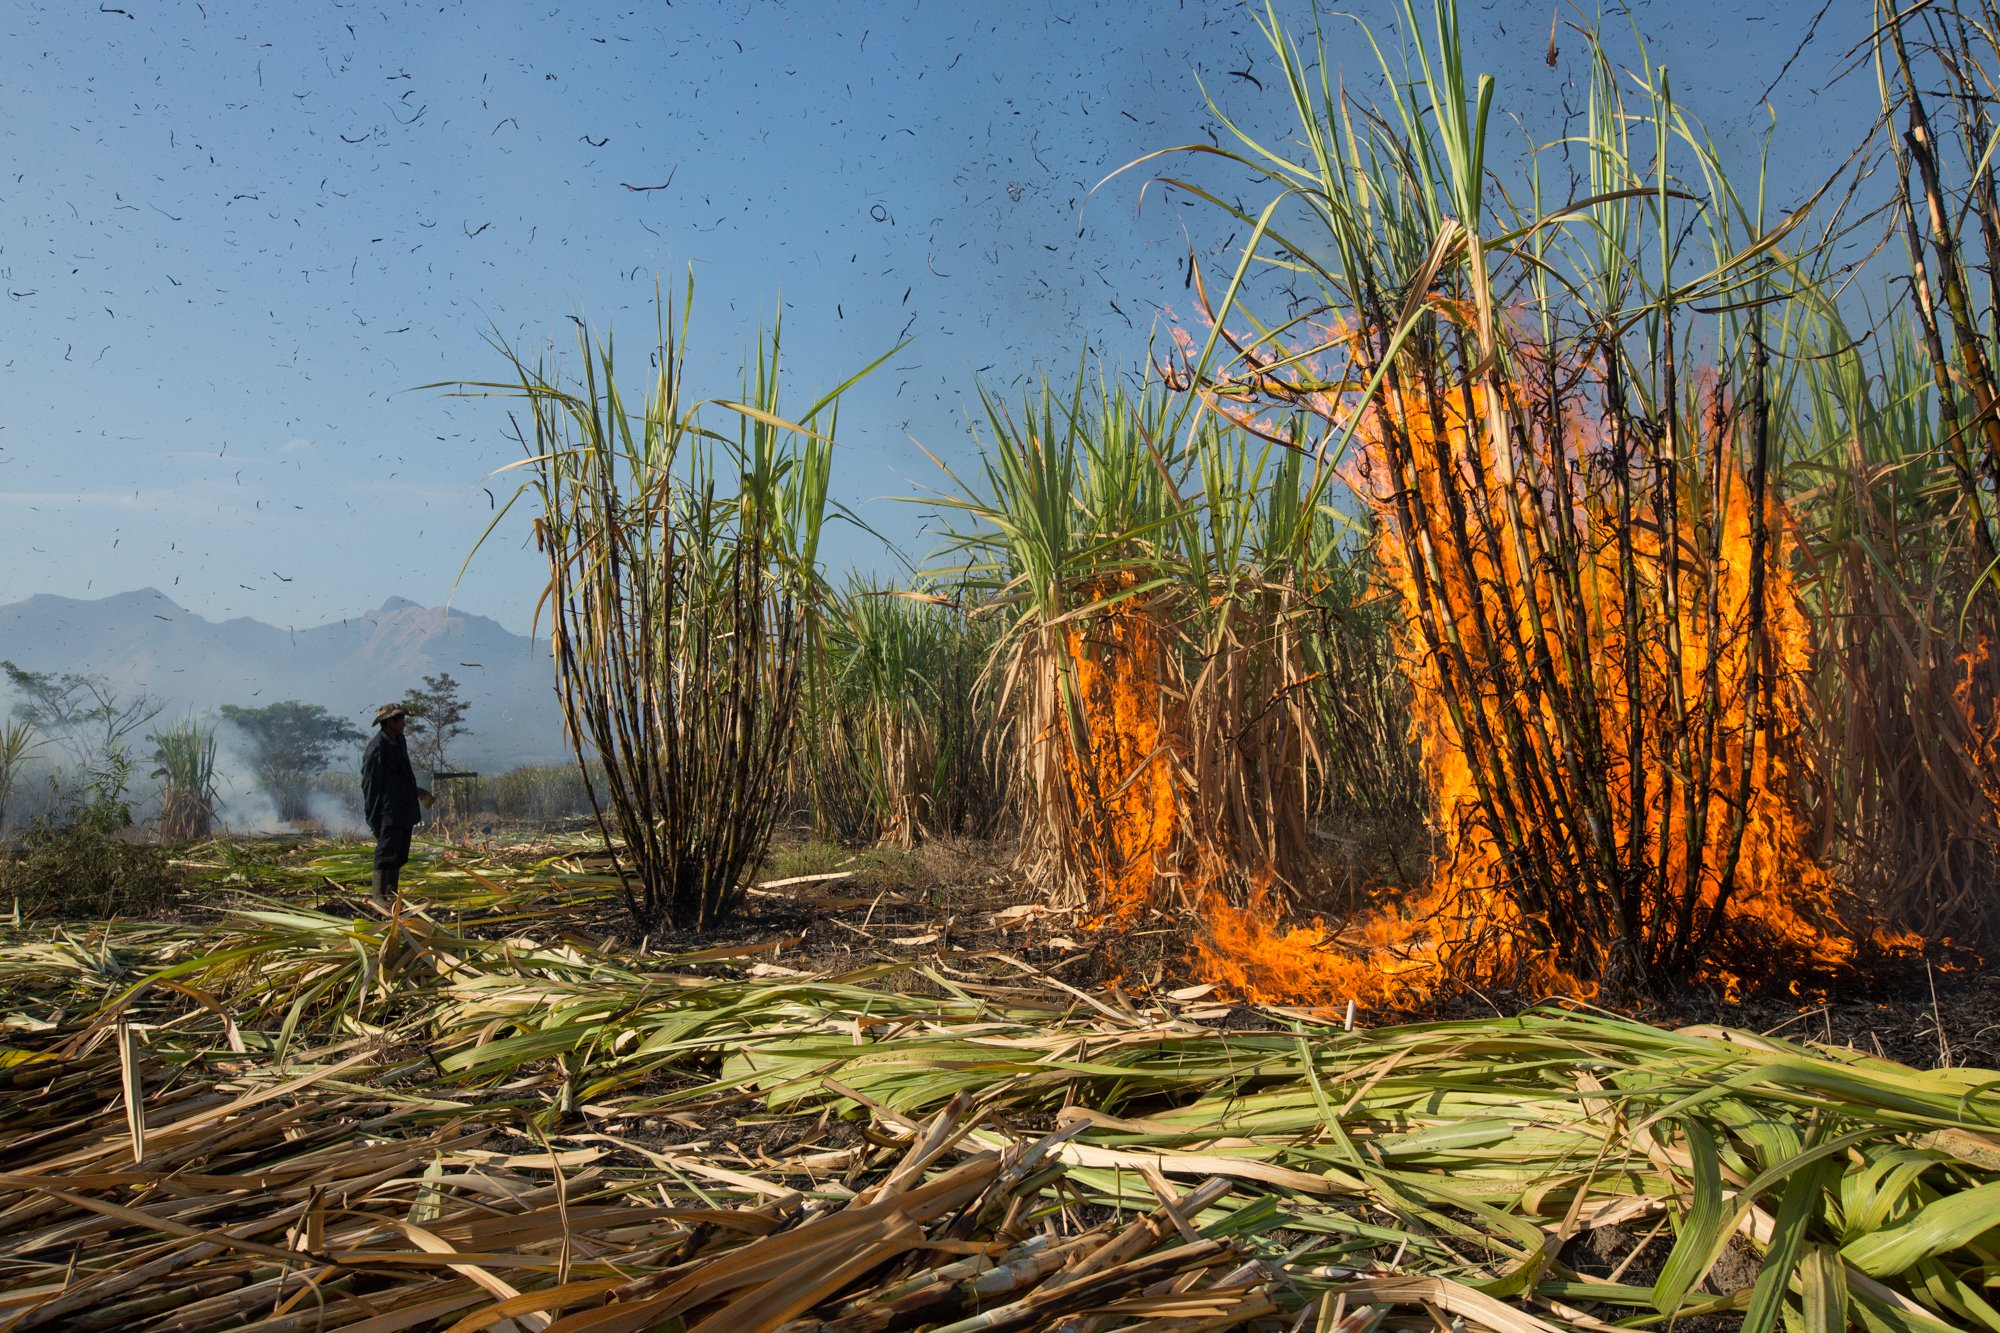  A section of green cane that went unburnt the night before is torched to discard of the leaves while workers proceed to cut through the field in Los Almendros, Cuscatlan, El Salvador.&nbsp; 